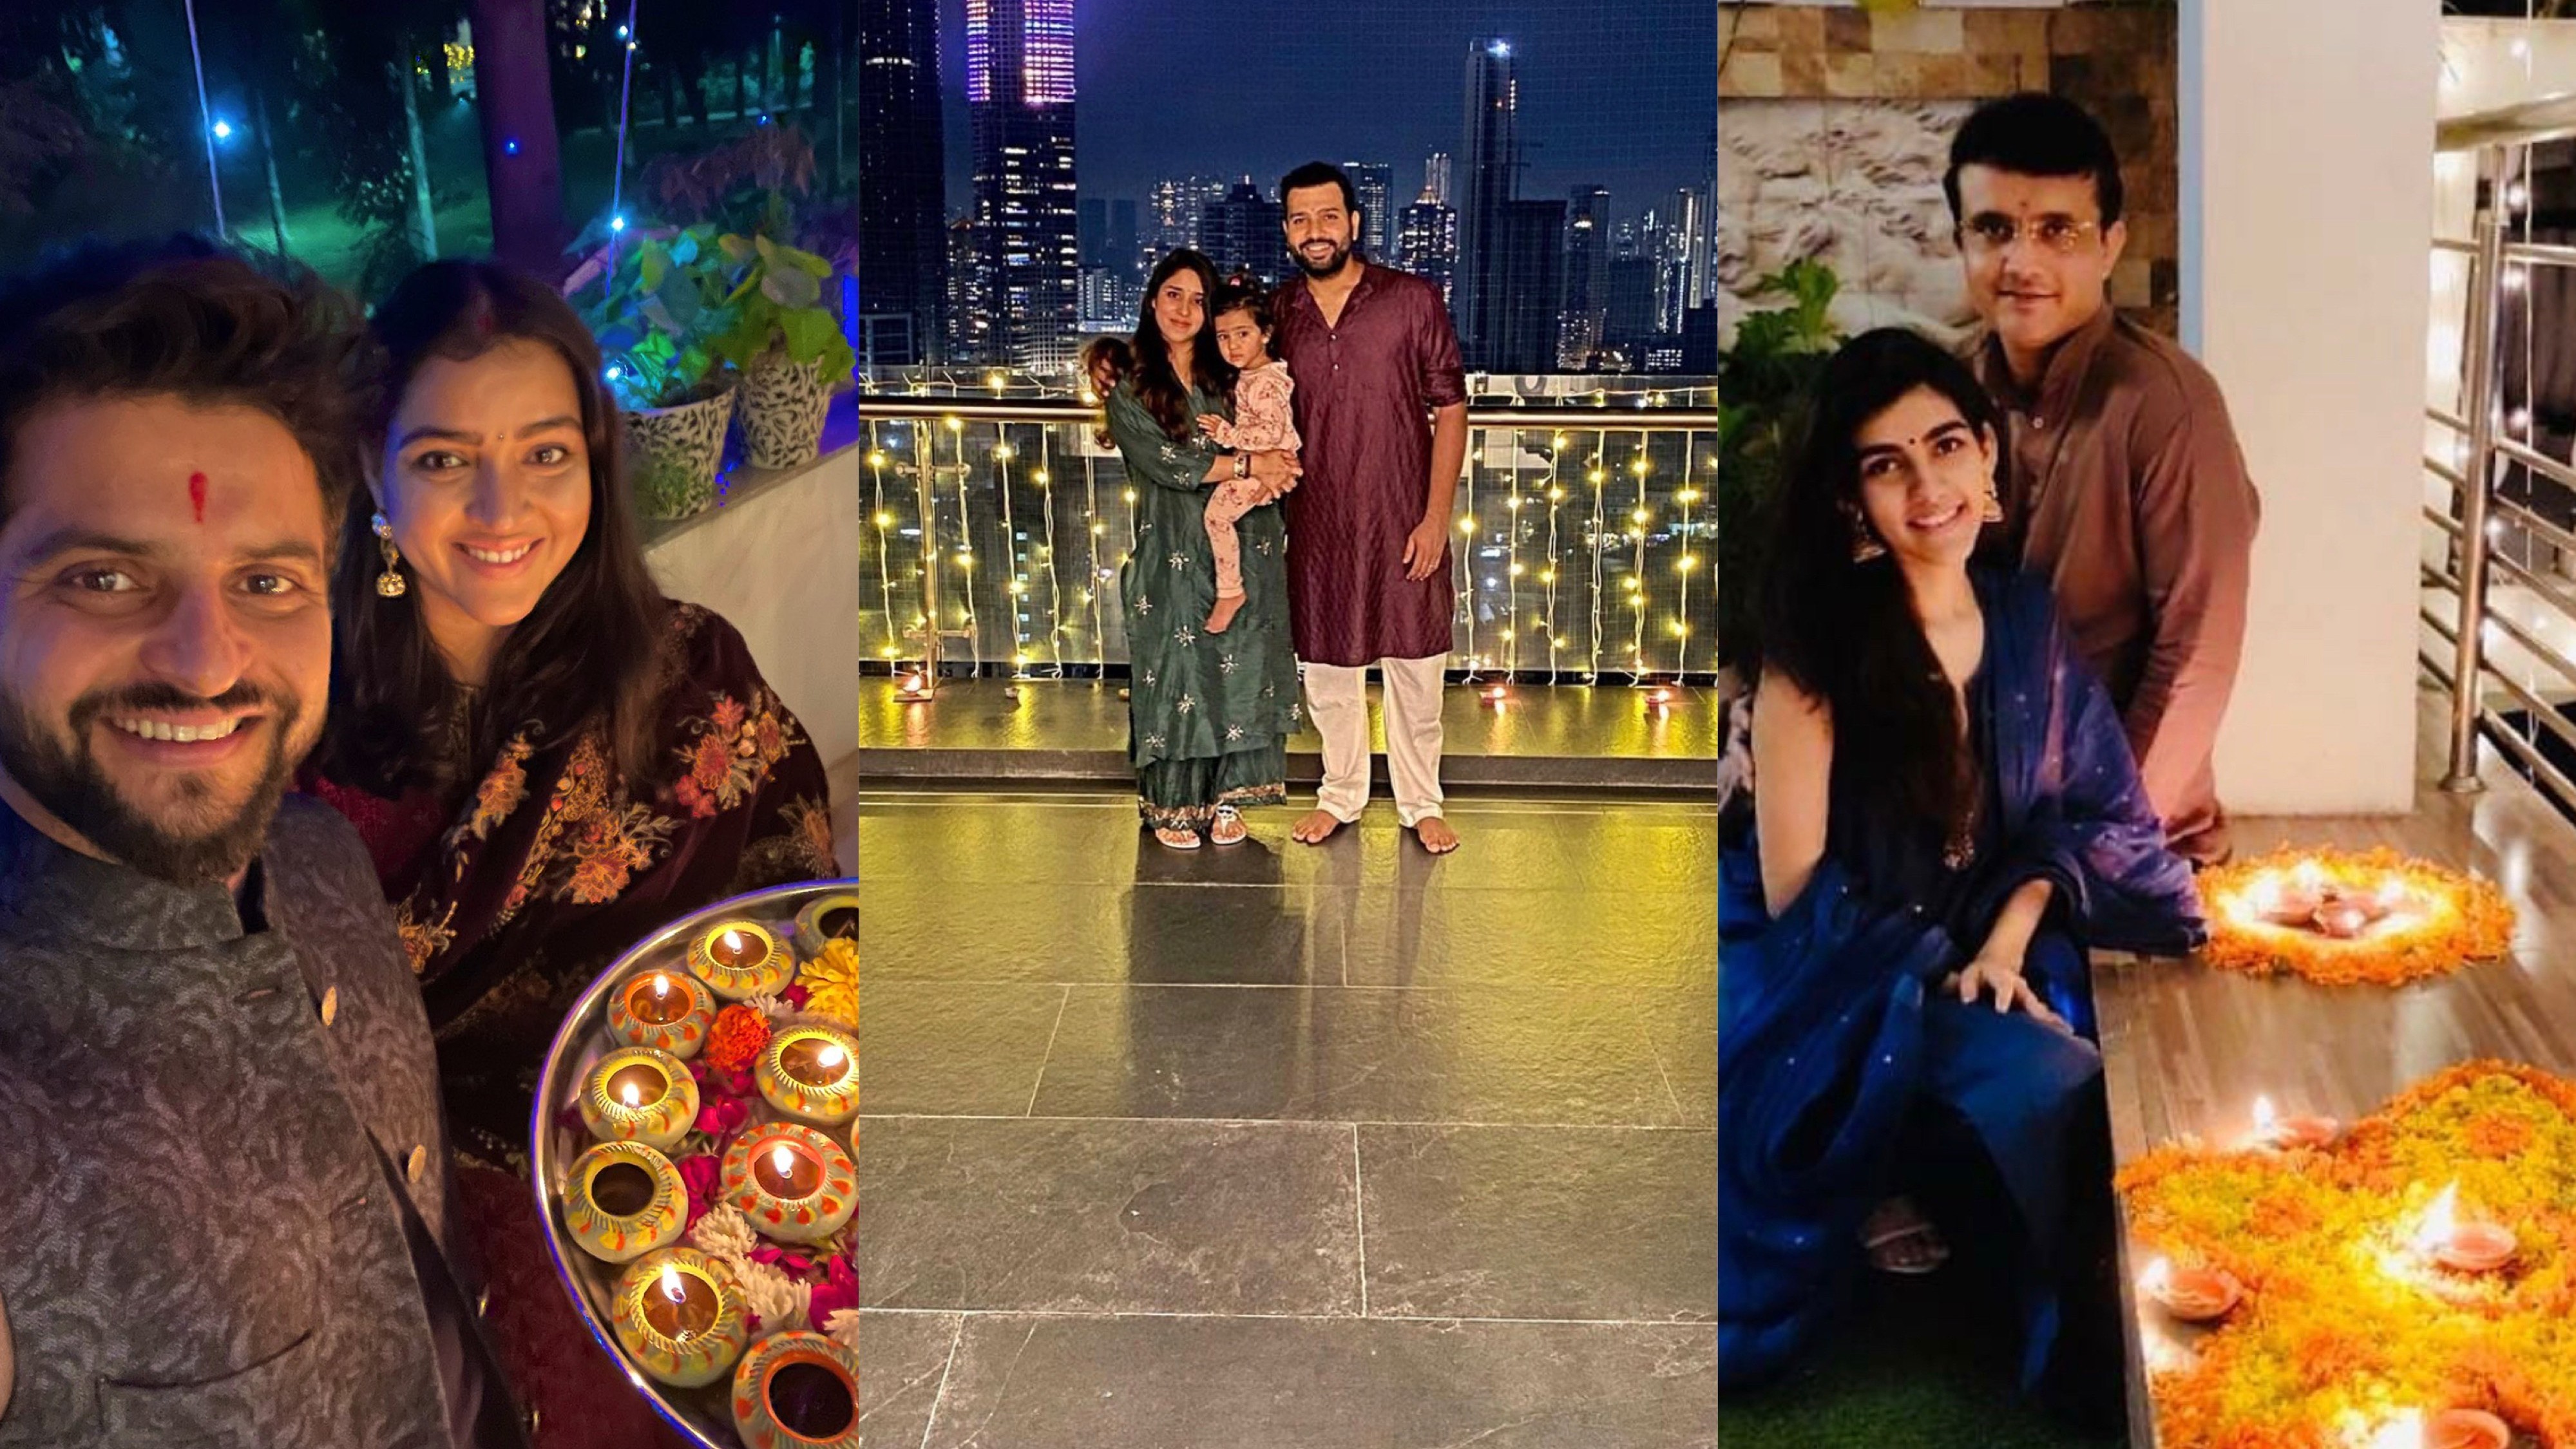 PICS: Indian cricketers light up social media with Diwali pictures